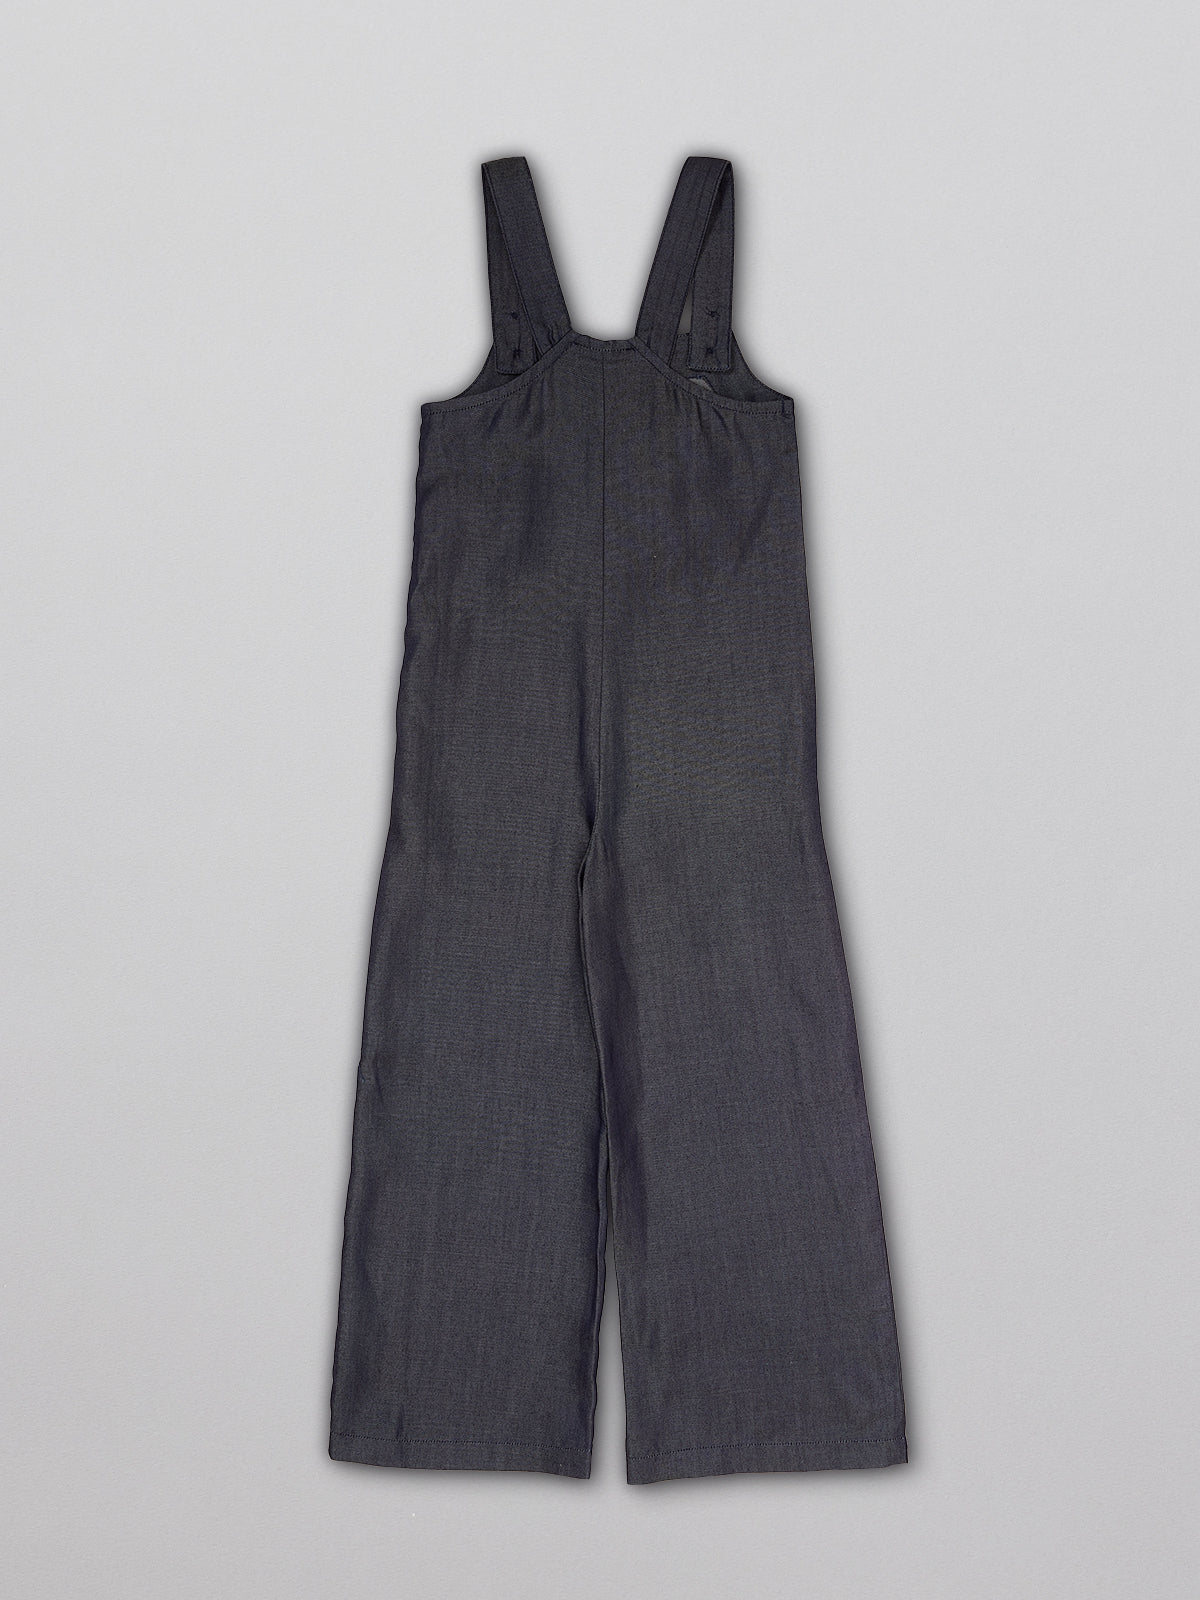 Sustainable dungarees for kids with a large front pocket and adjustable straps, pictured from the back.